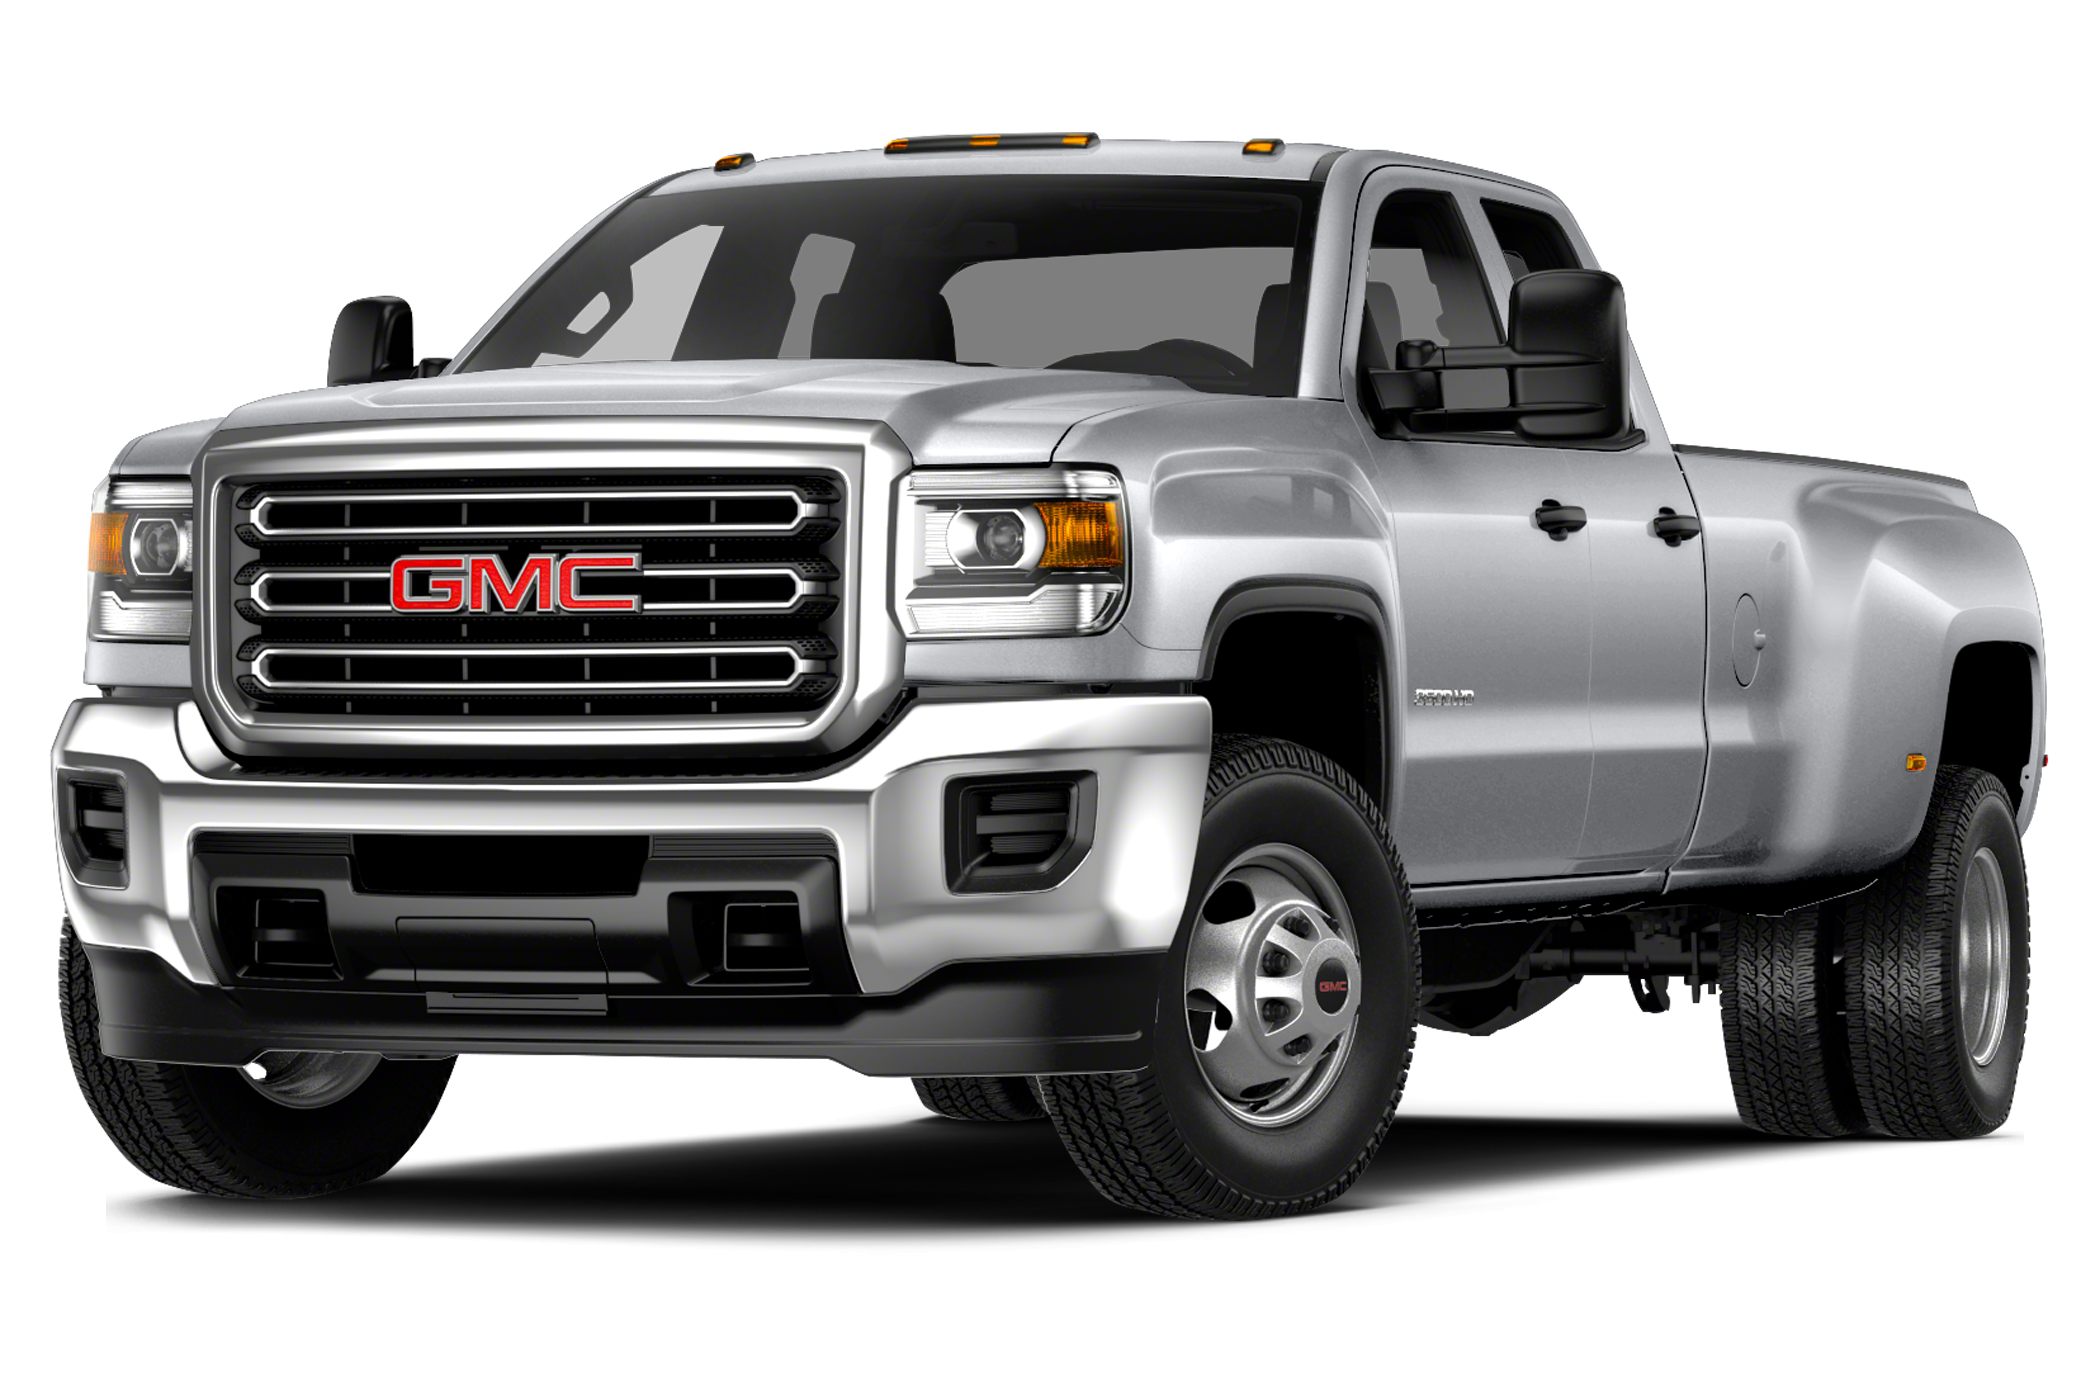 2015 Gmc Sierra 3500hd Base 4x2 Double Cab 158 1 In Wb Drw Pictures